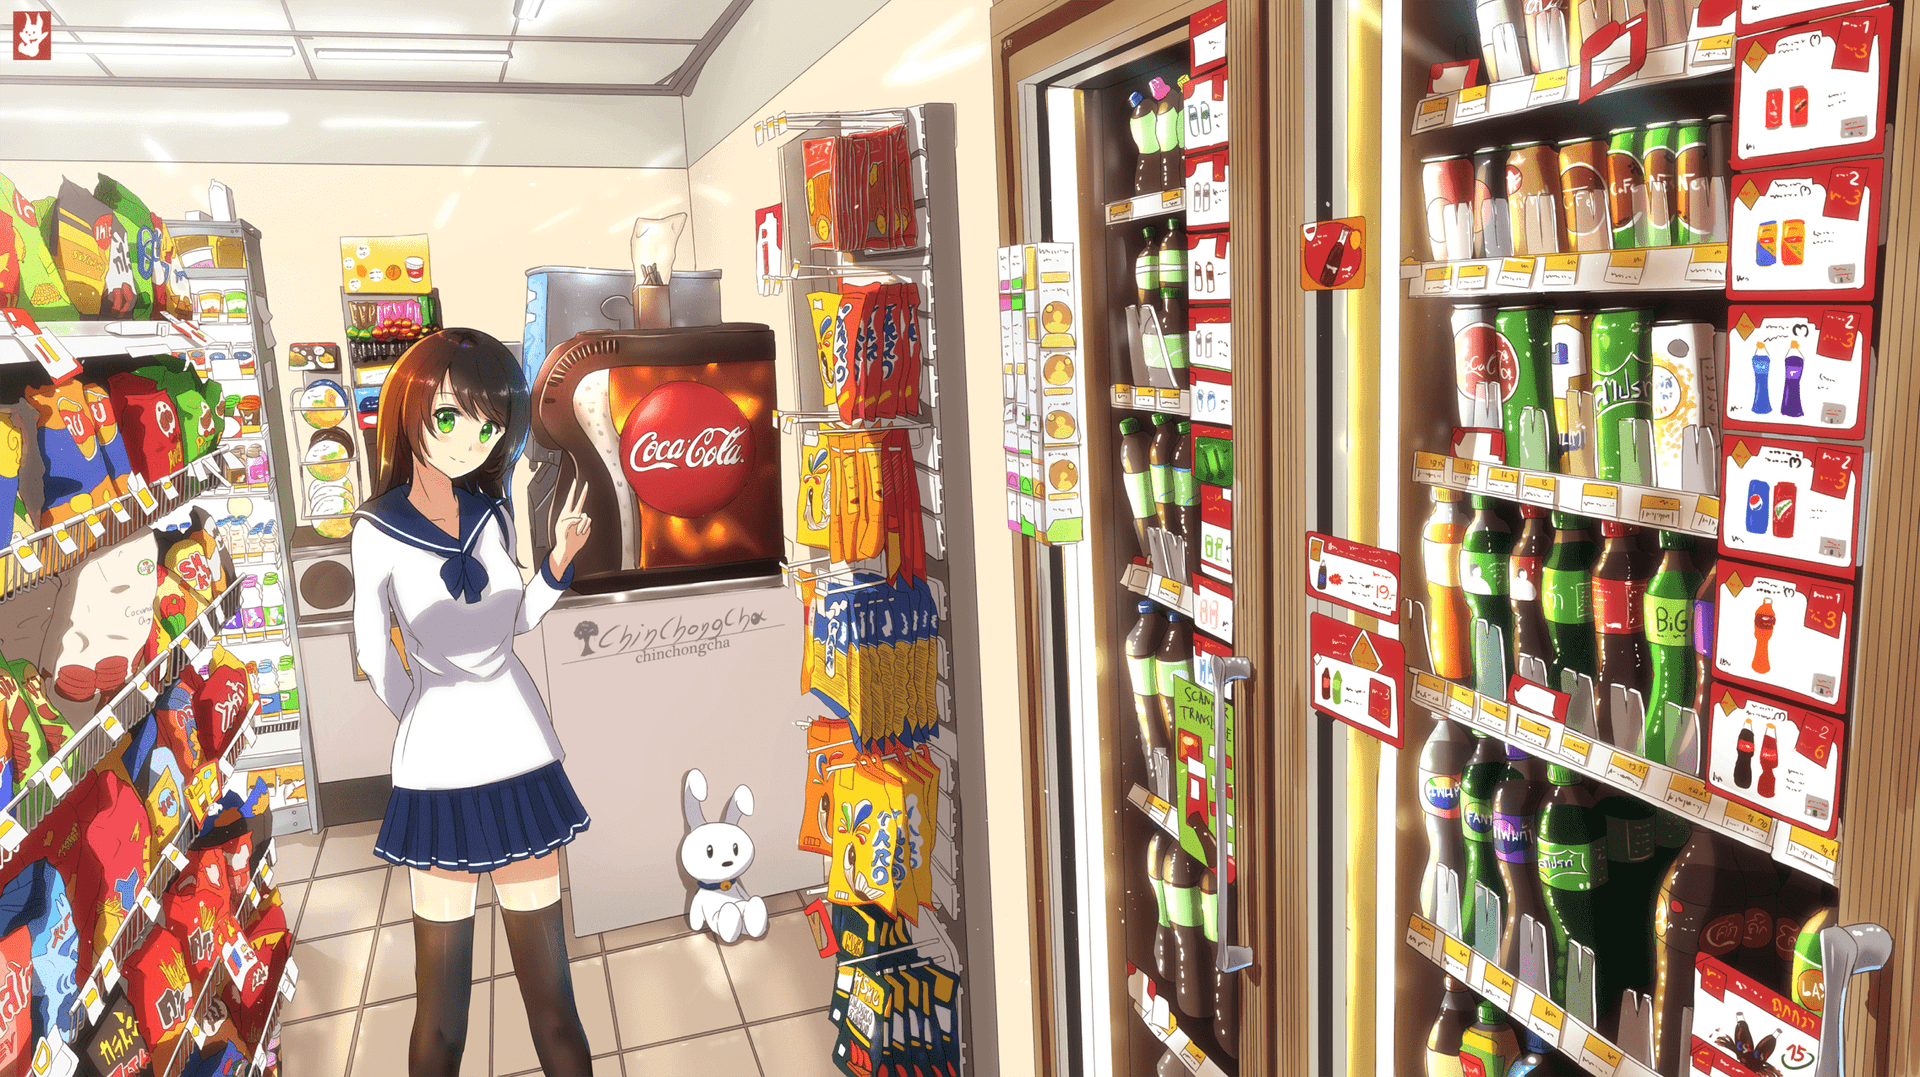 A Girl In A Store